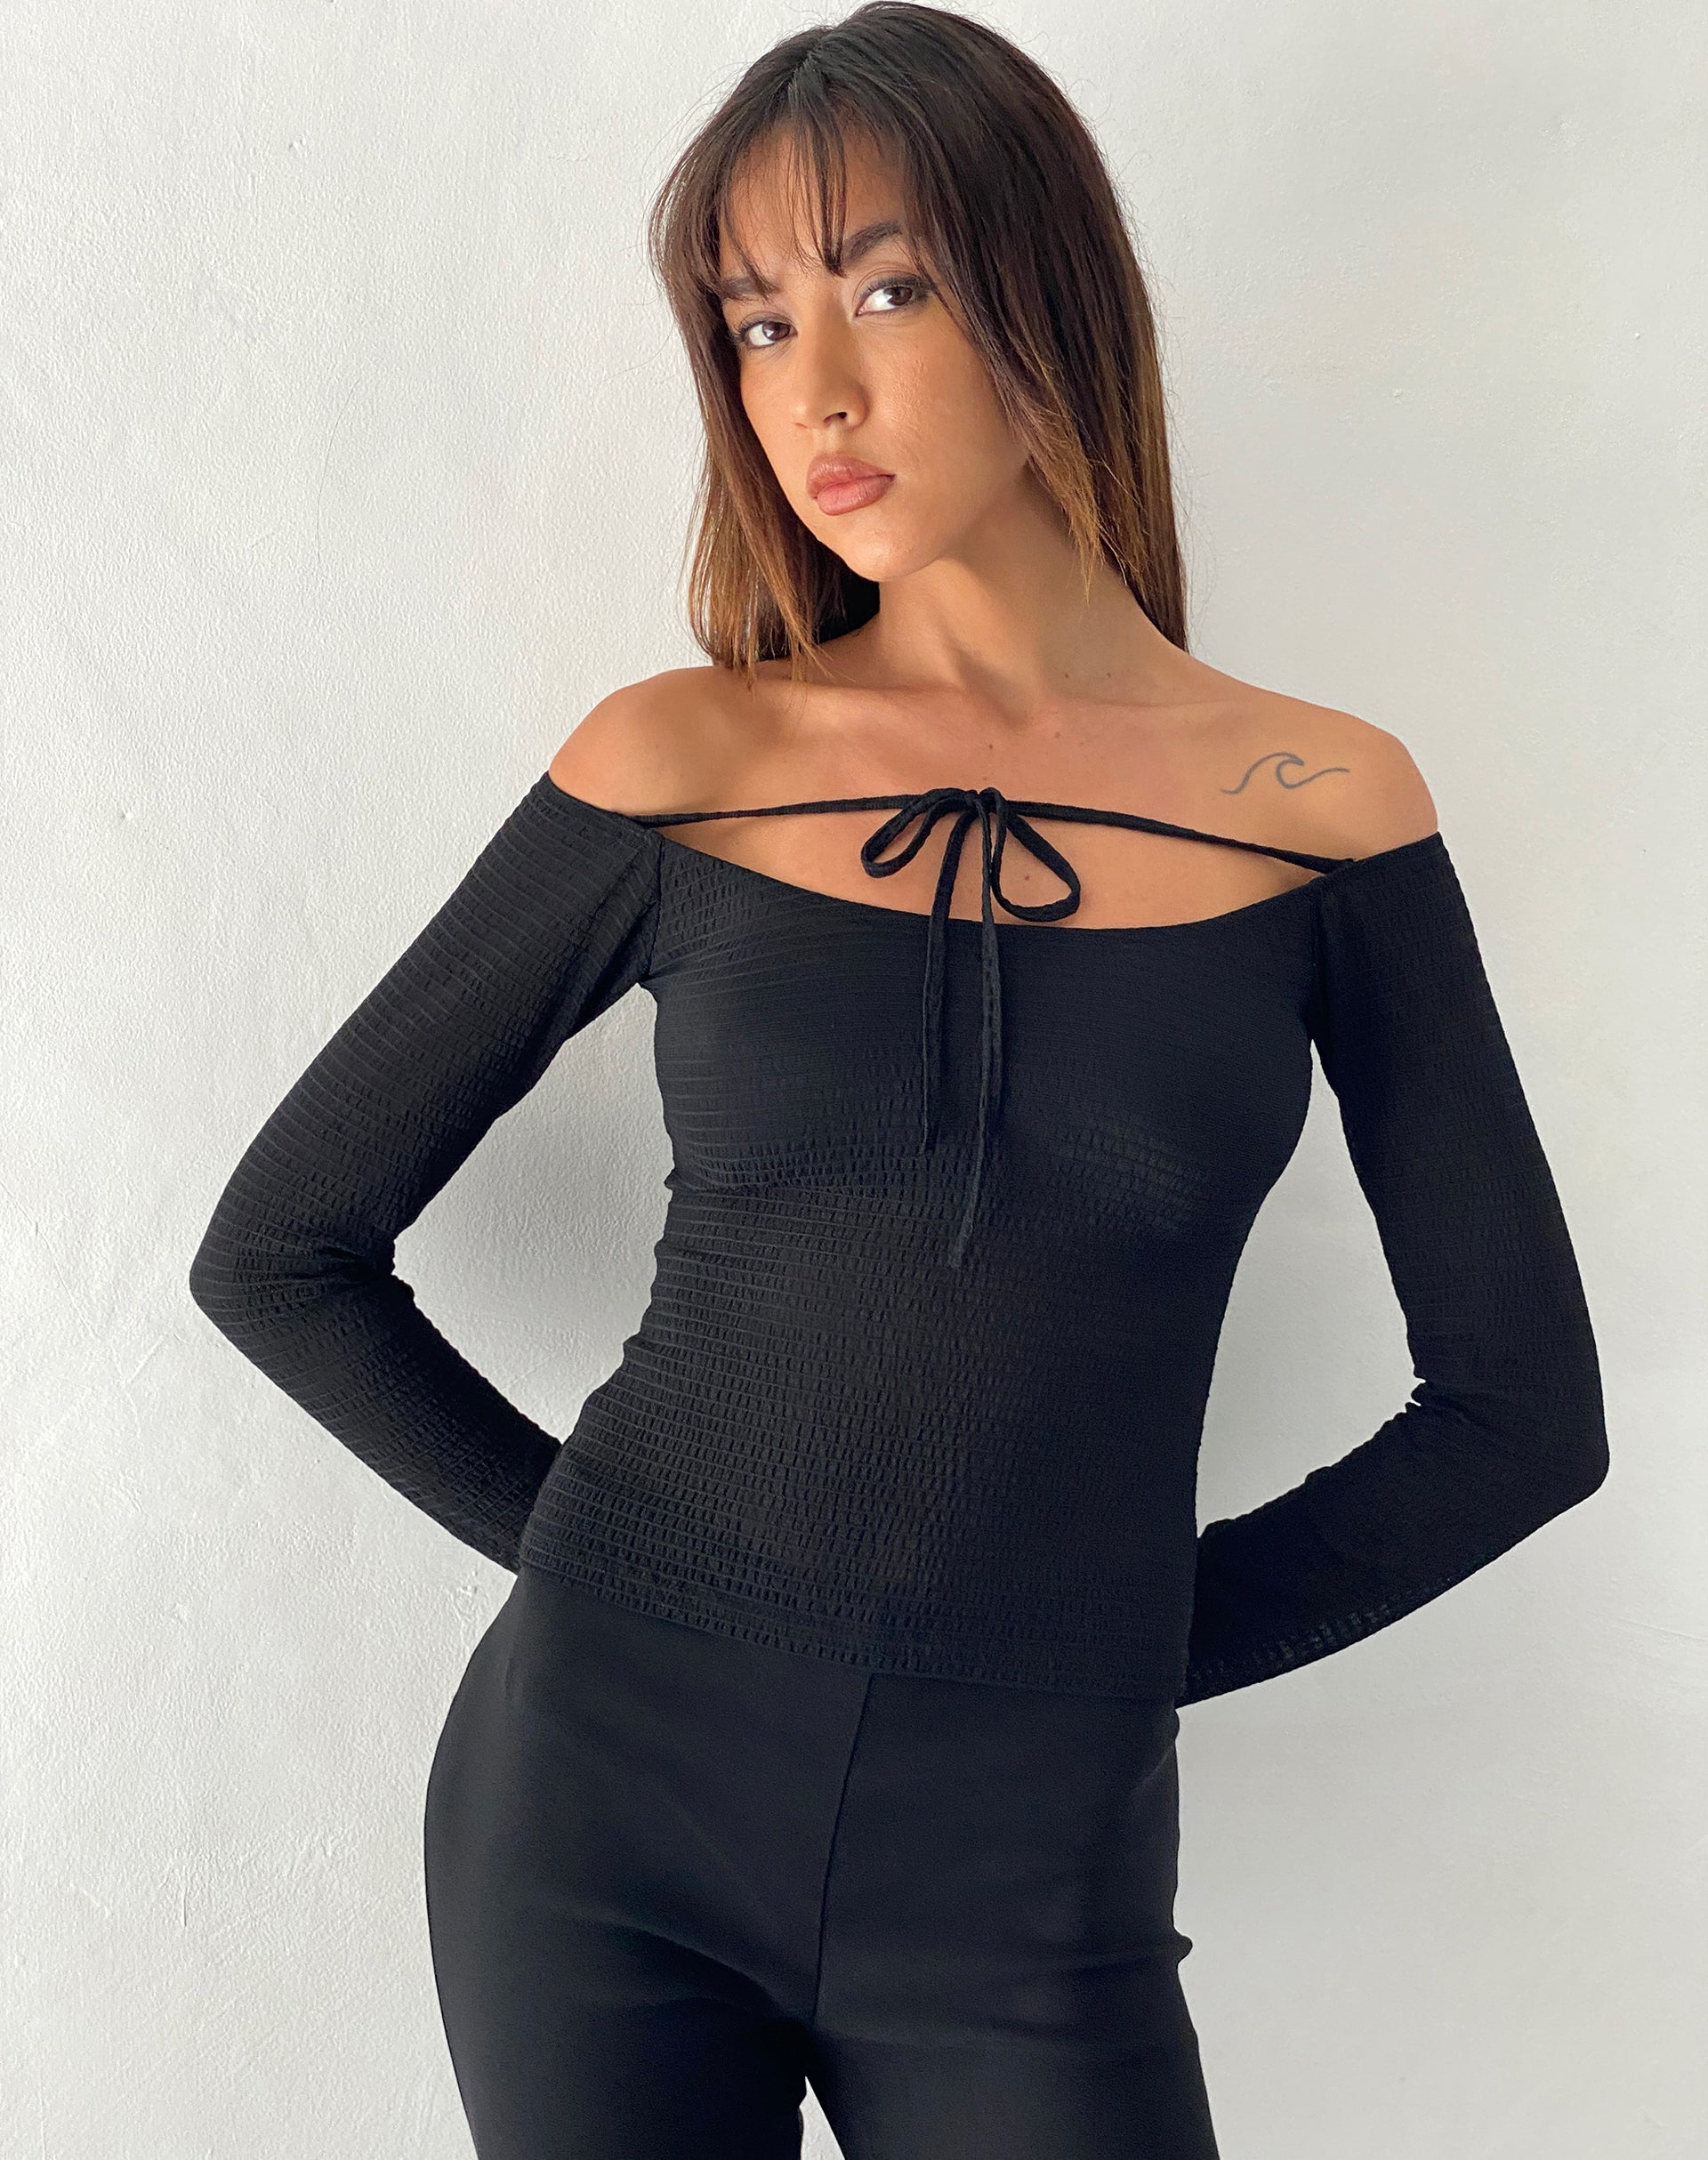 Image of Alondra Long Sleeve Tie Front Top in Textured Black